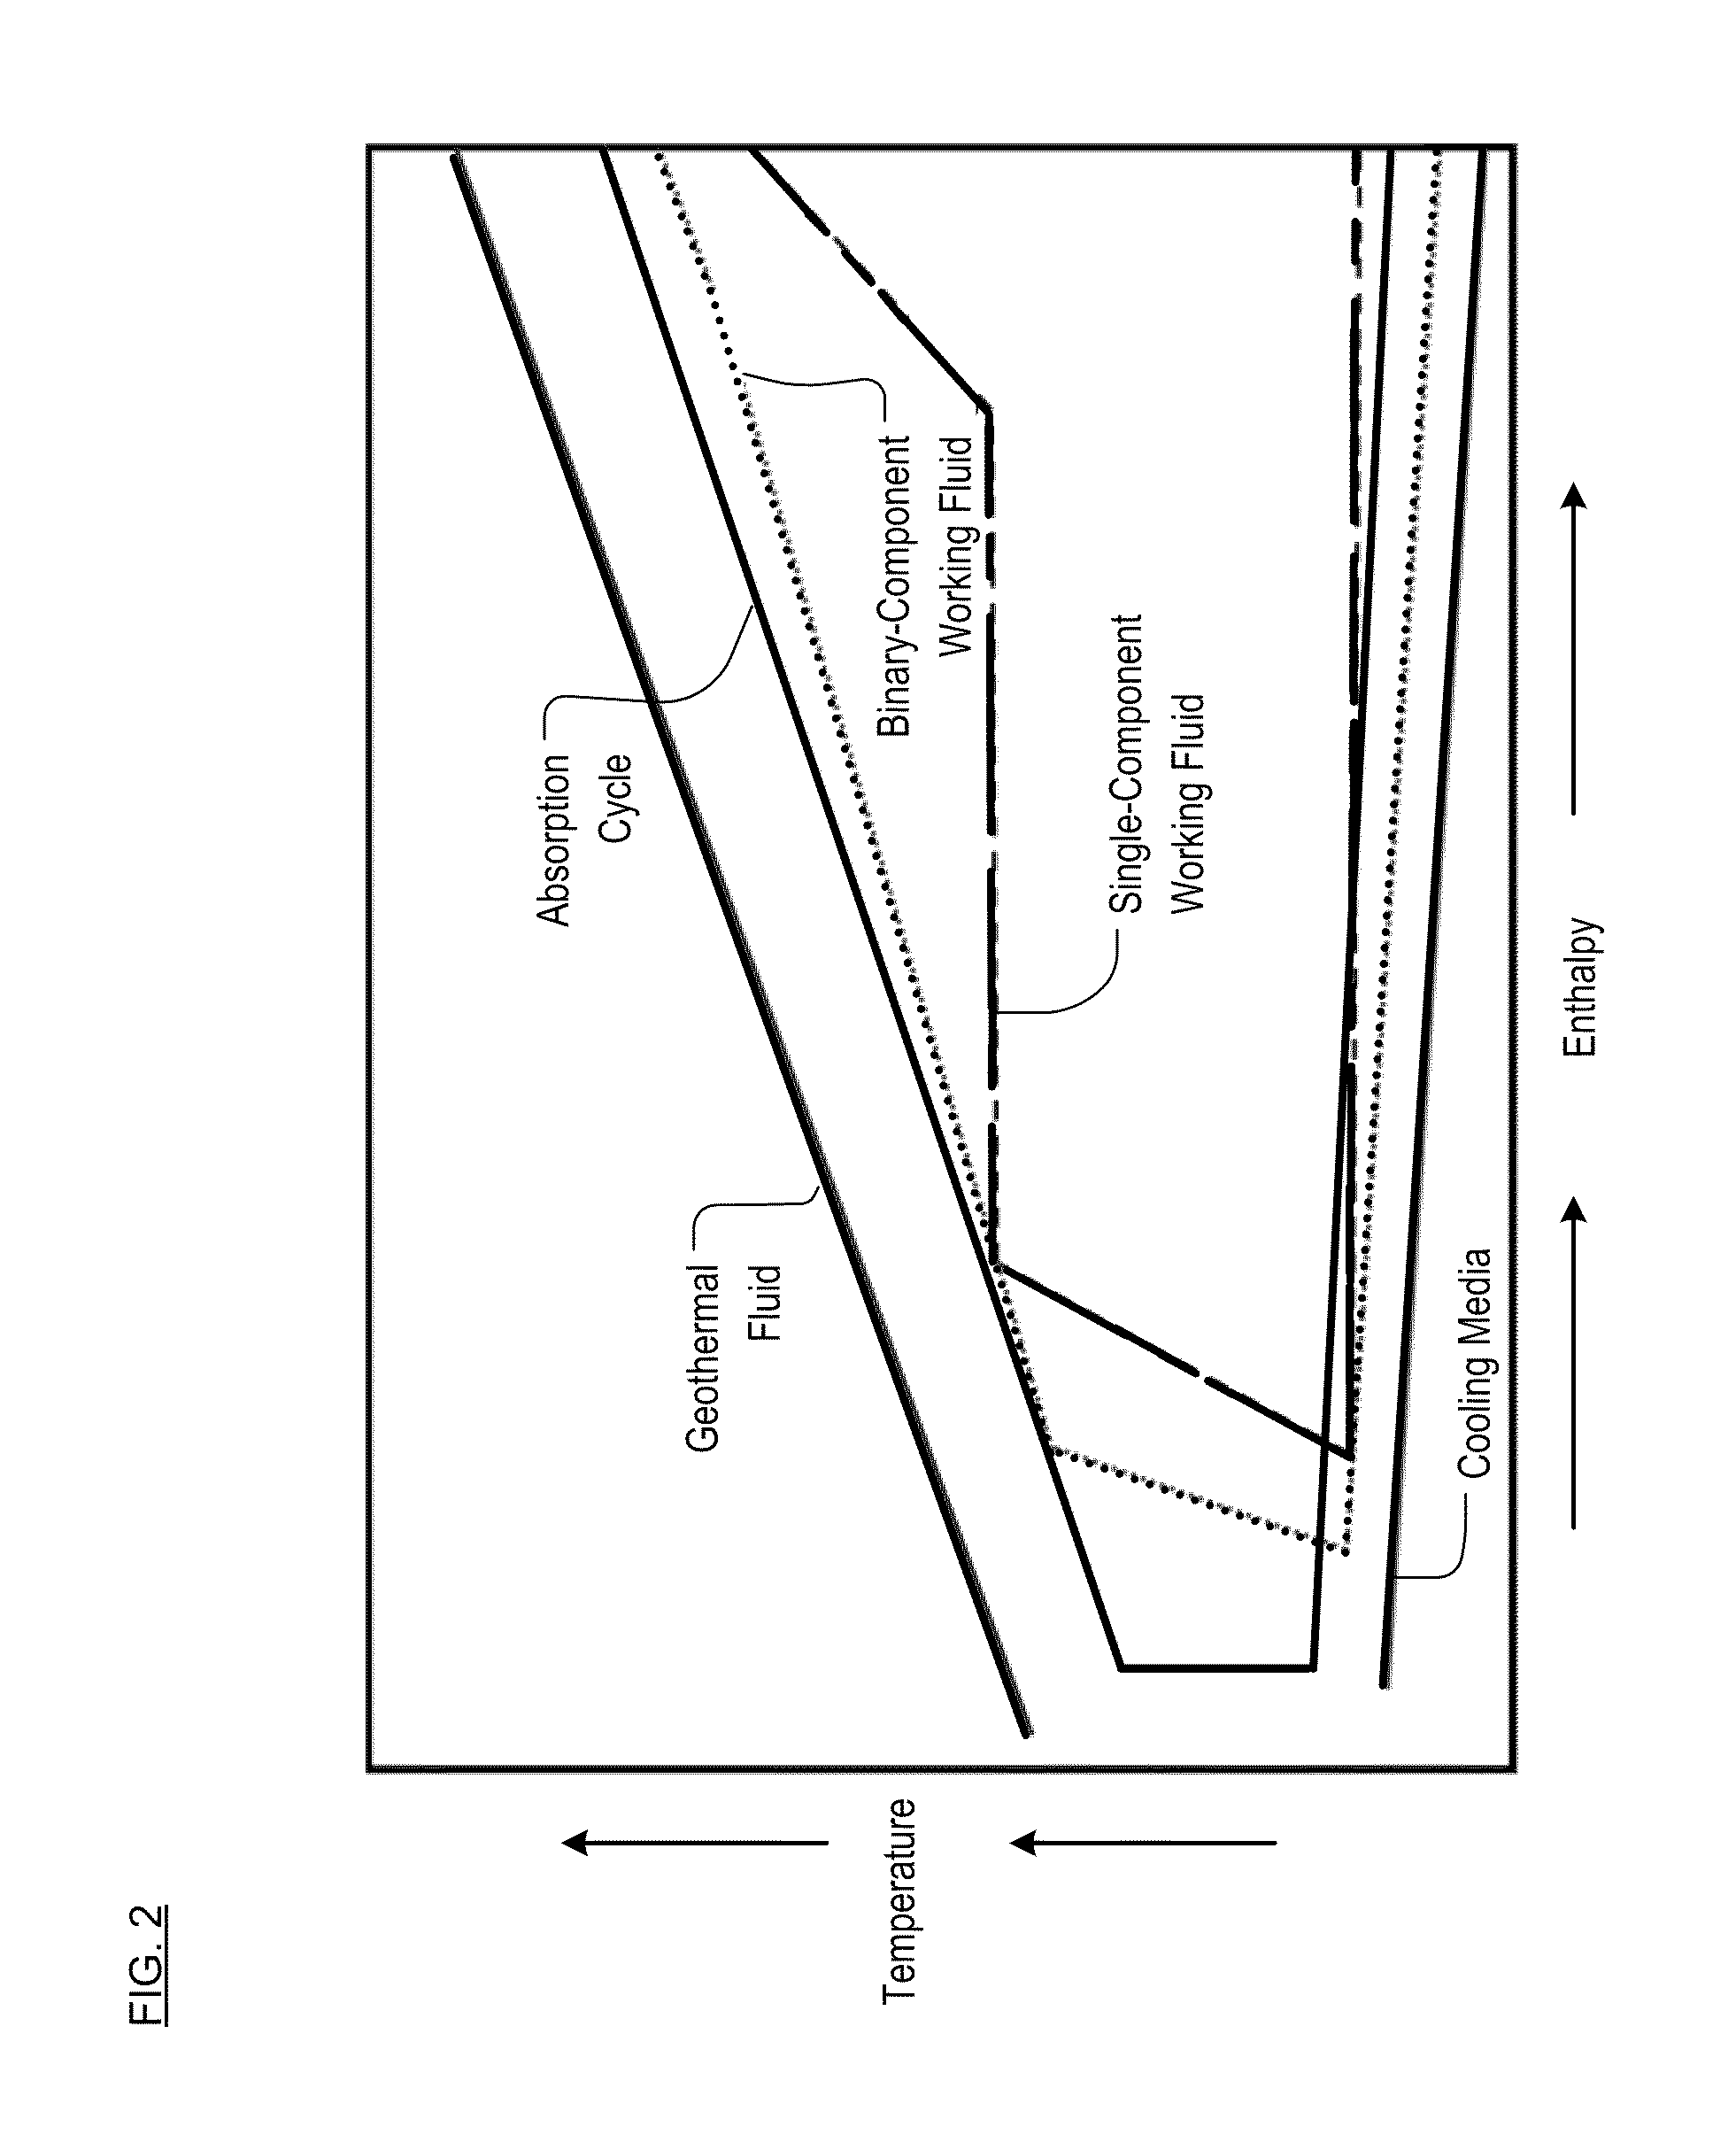 Working-fluid power system for low-temperature rankine cycles